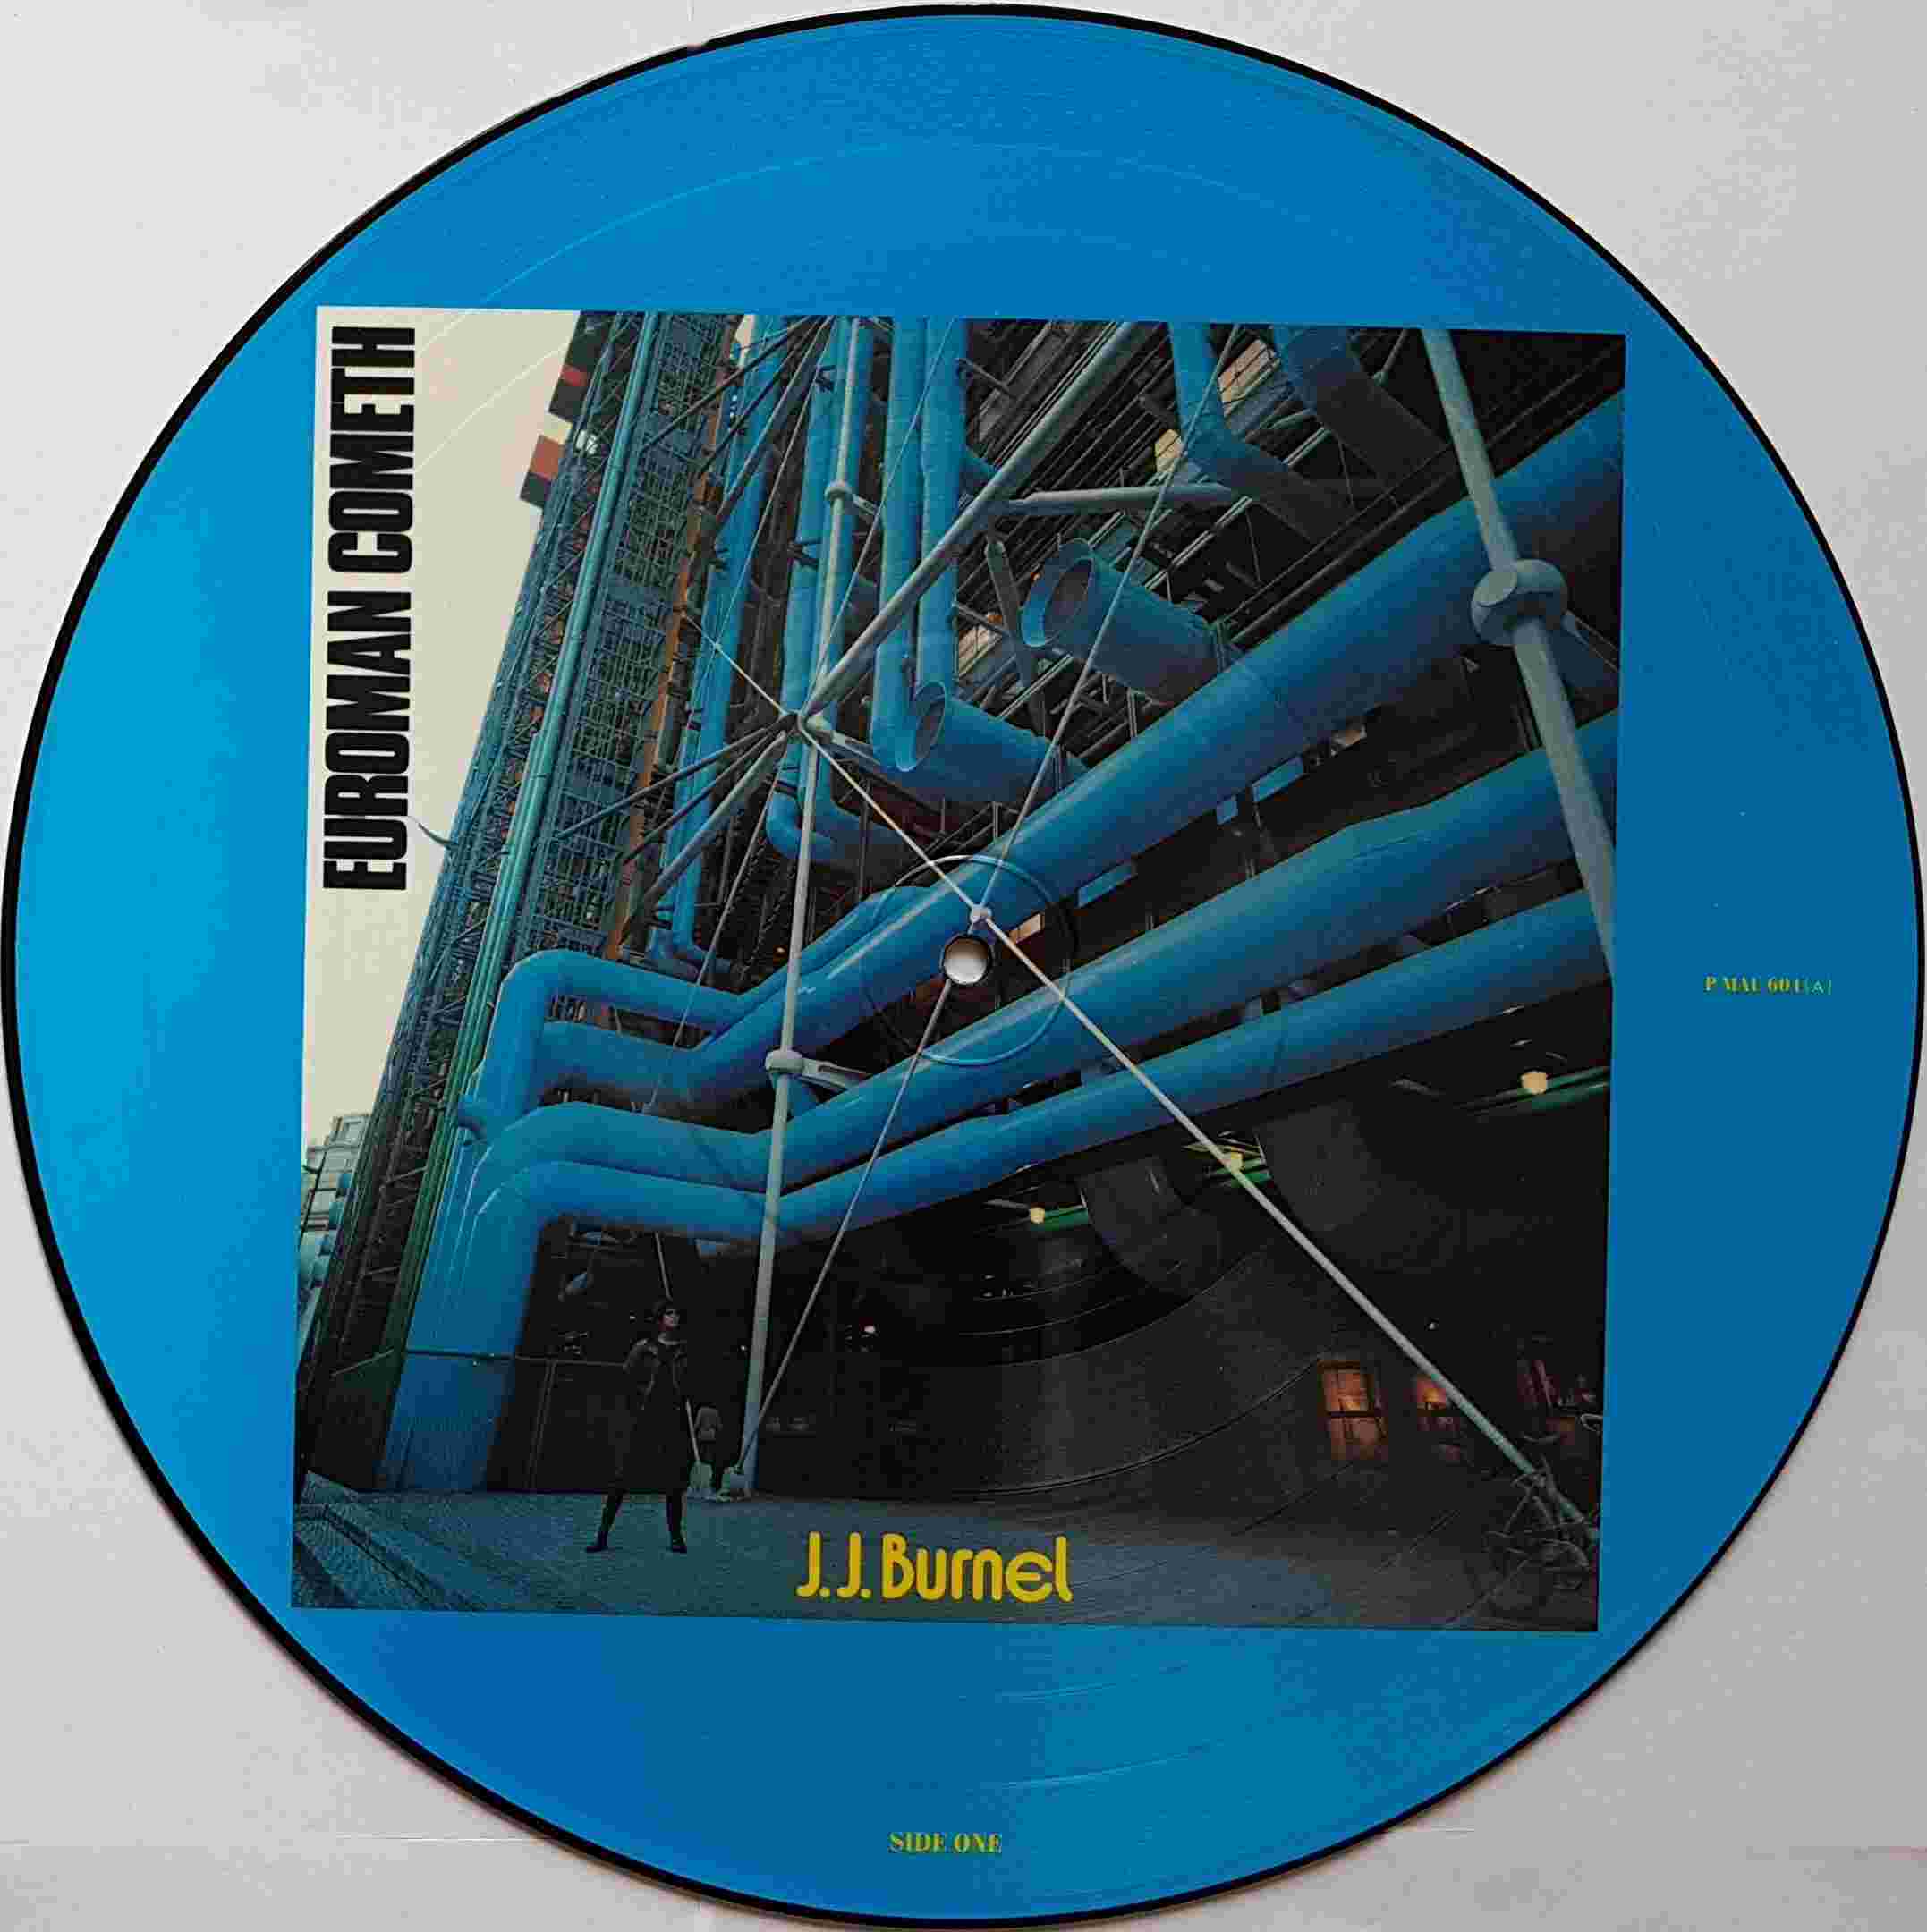 Picture of PMAU 601 The Euroman cometh - Picture disc (3000 only) by artist Jean Jacques Burnel  from The Stranglers albums